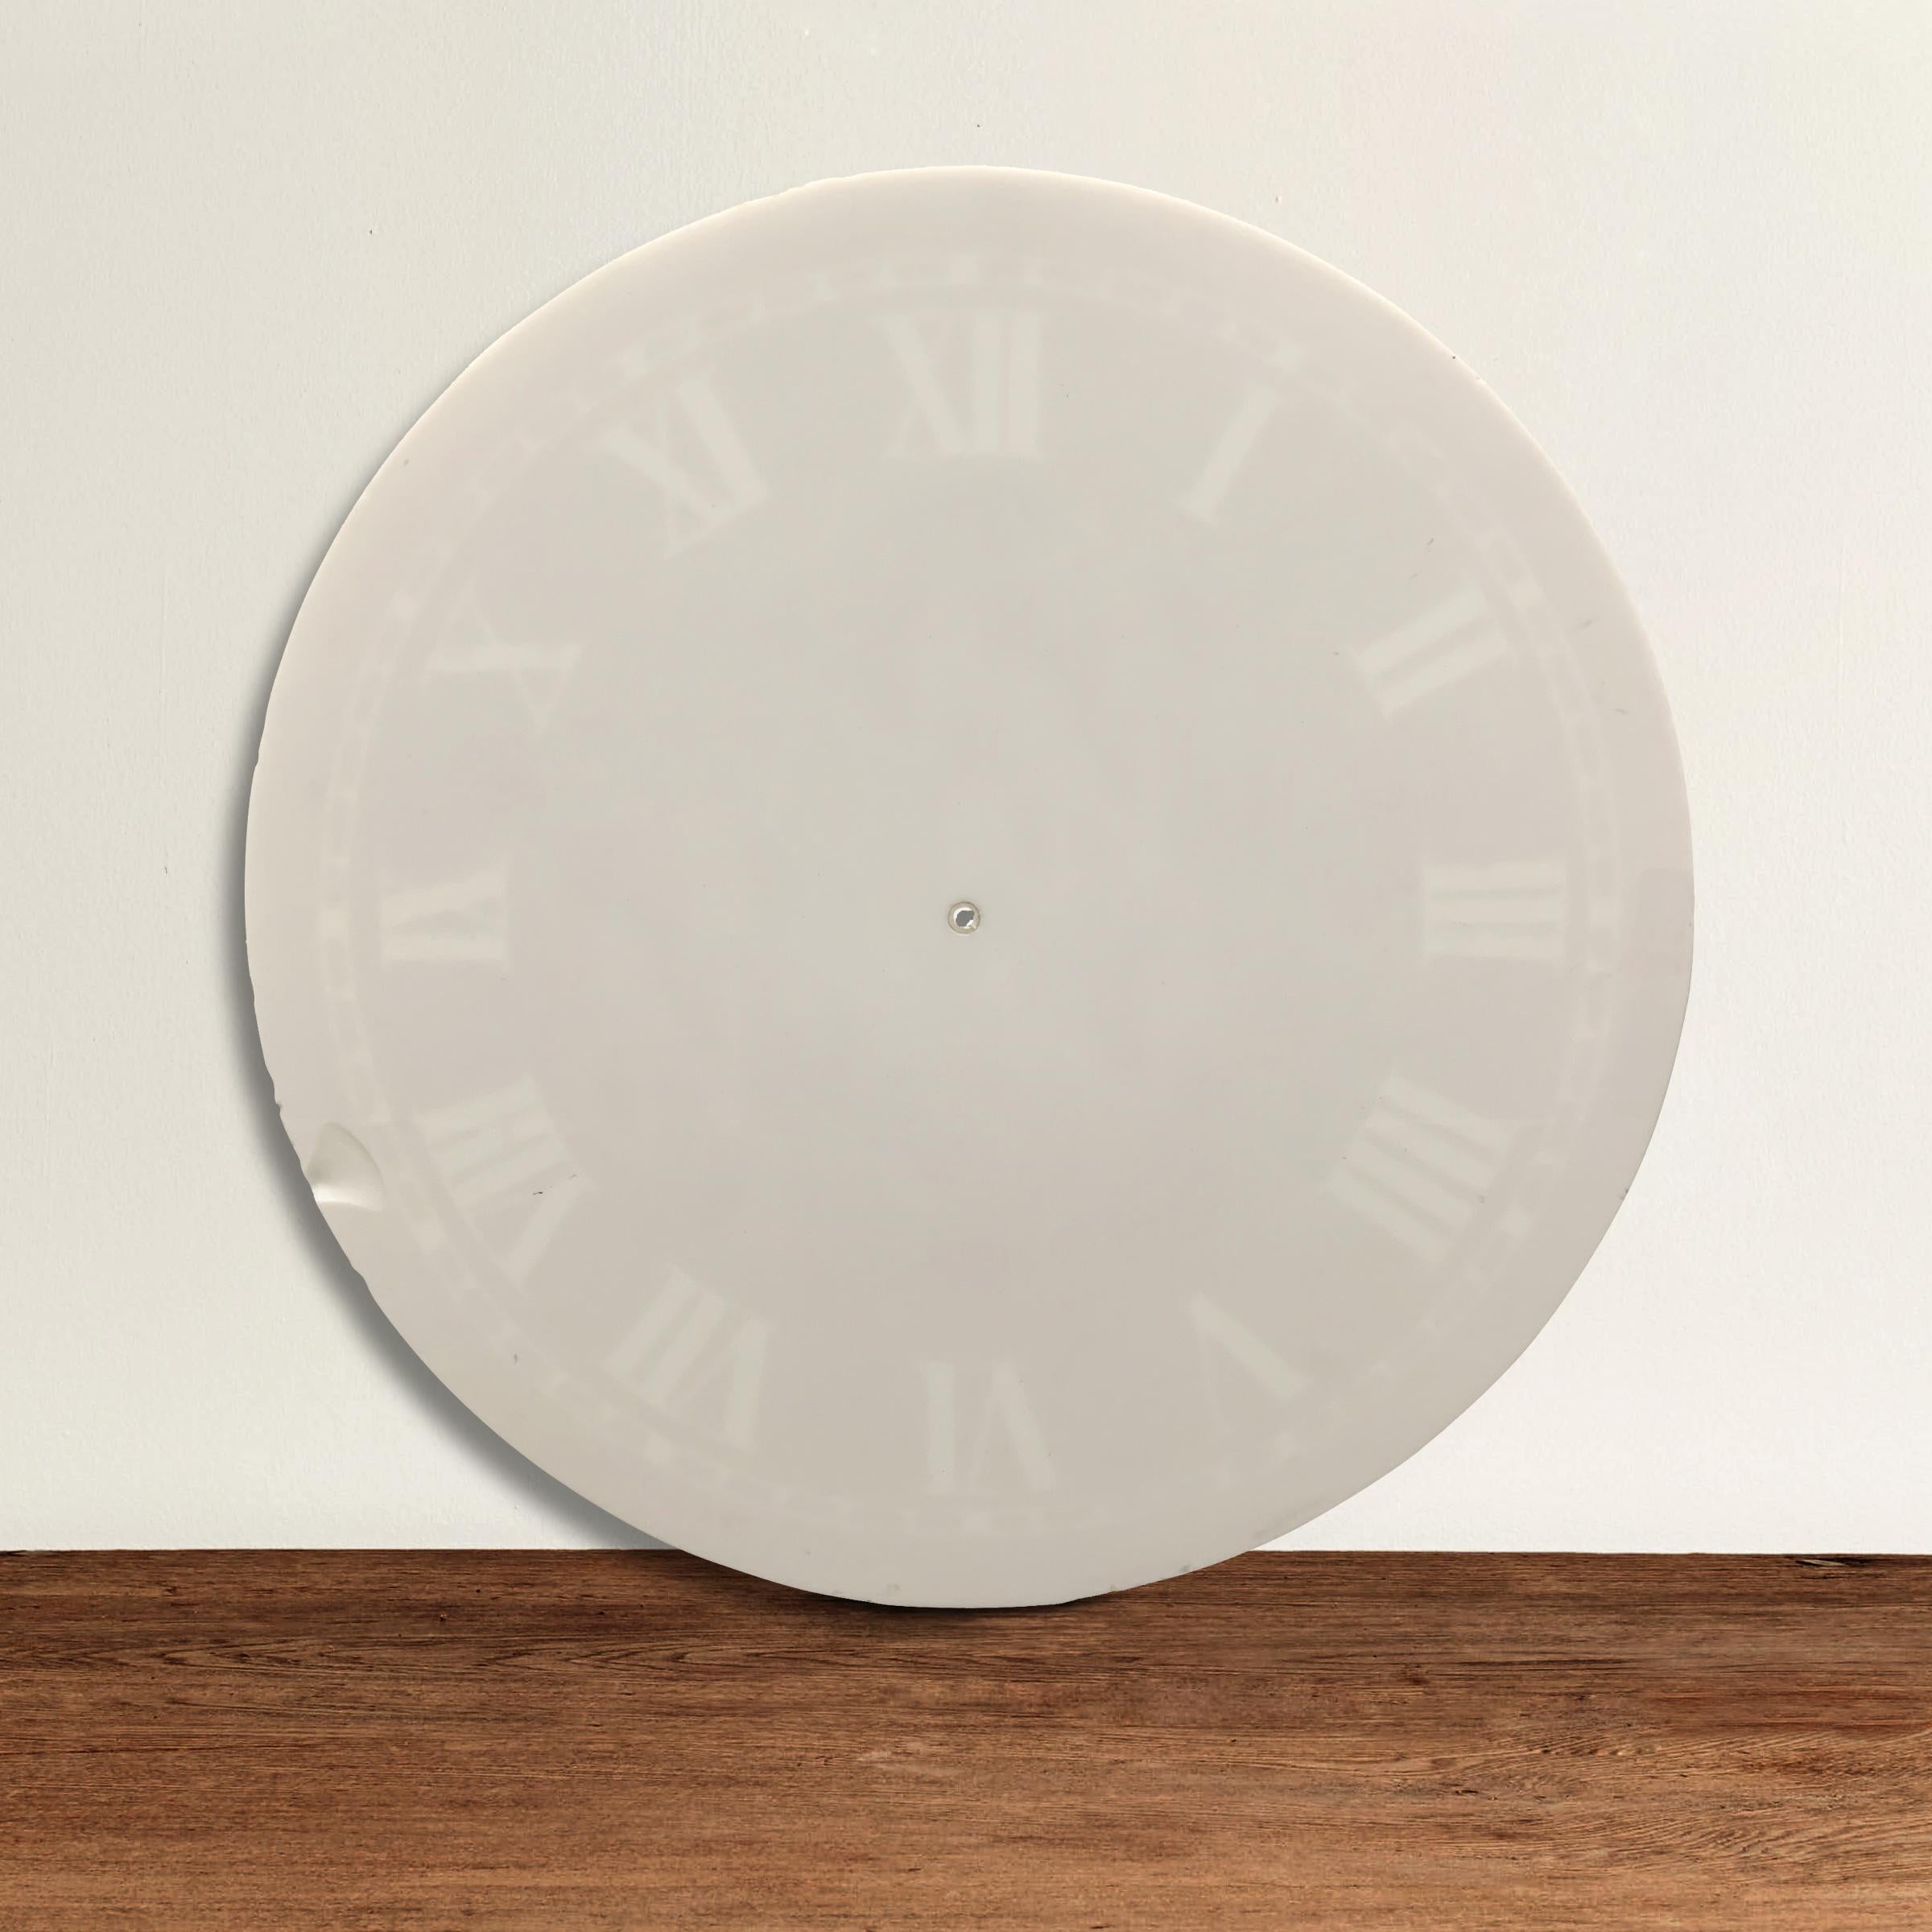 A large 19th century American milk glass clock face with faded Roman numerals around the perimeter. The numbers were originally applied to the surface of the glass and have left a shadow impression. The mineral, manganese, used to be added to glass